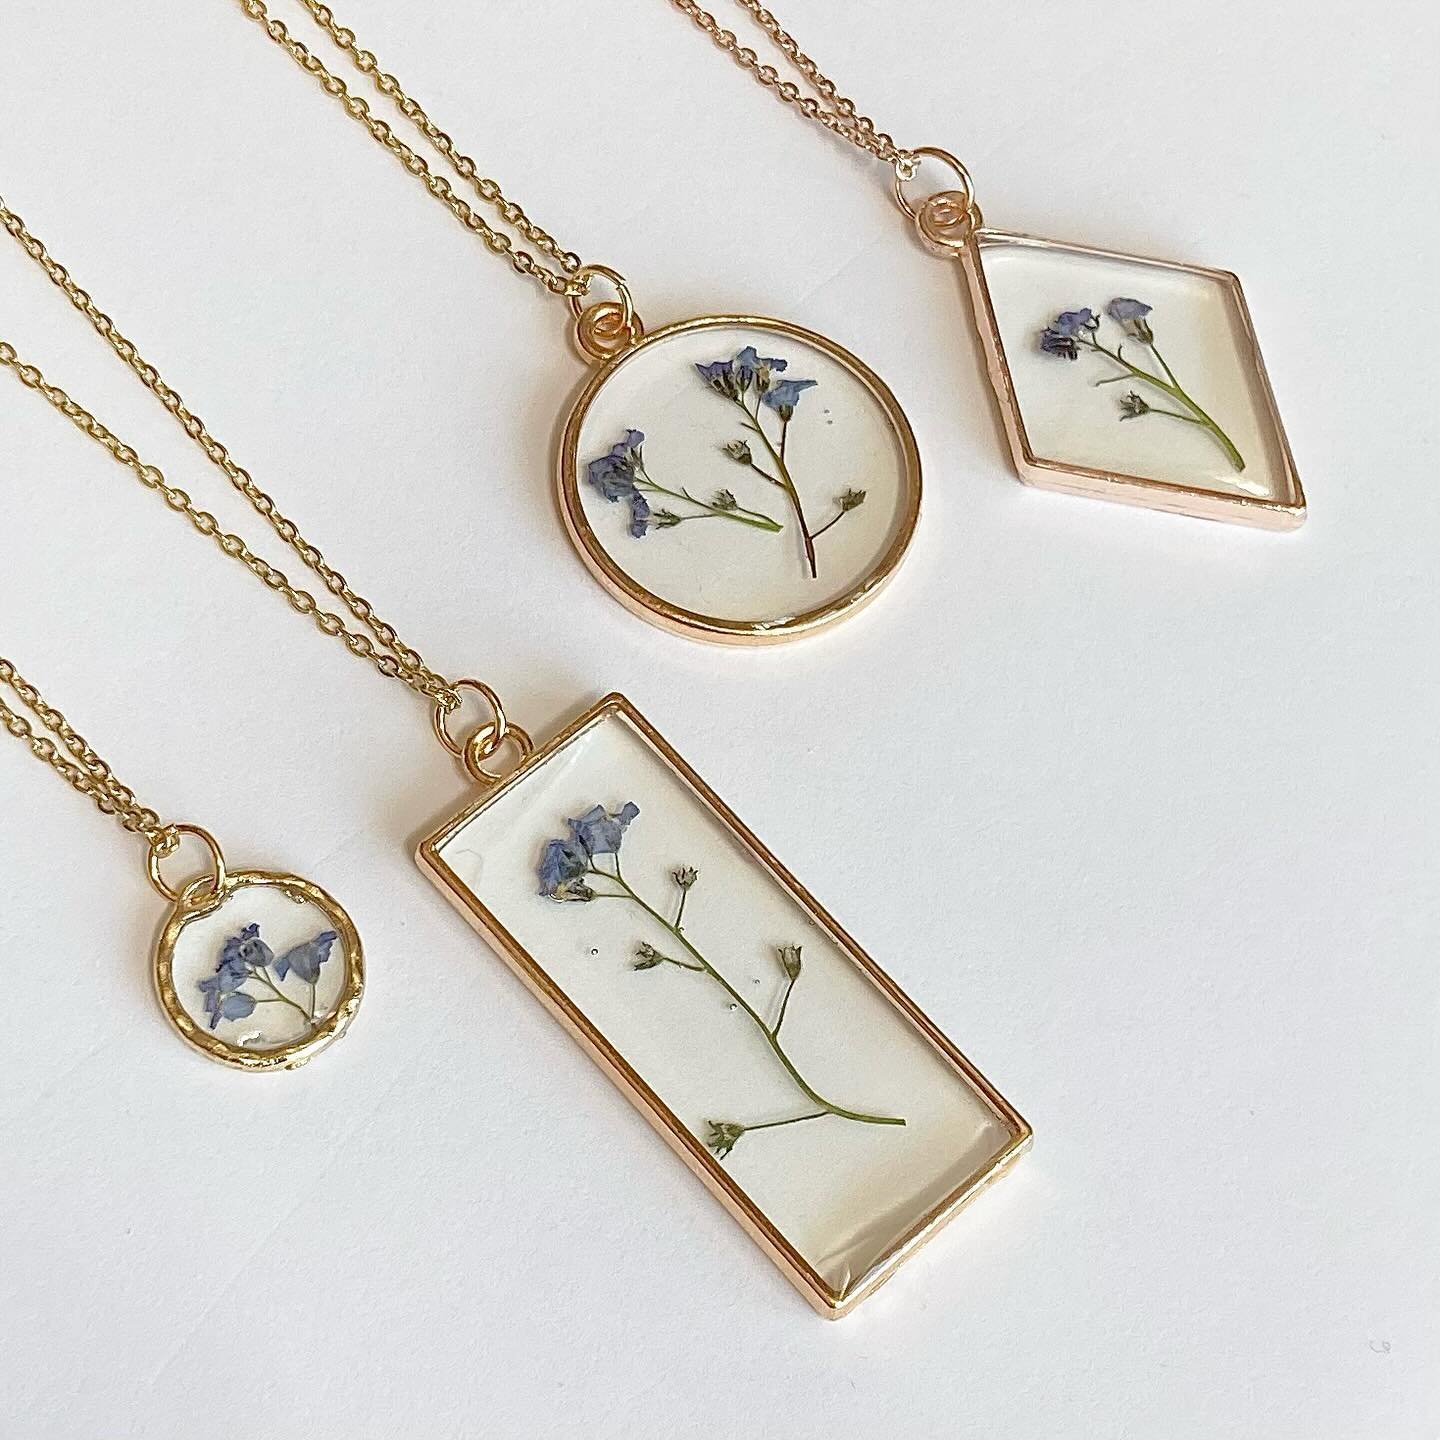 A variety of necklaces! Which style would you pick&mdash;forget-me-nots, buttercups, white florals on black resin, or antique? 

🐝 take a piece of the Berkshires with you 🐝 
.
.
.
.
.
.
.
.
.

#pressedflowers  #jewelryshop  #shopjewelry #jewelrysho